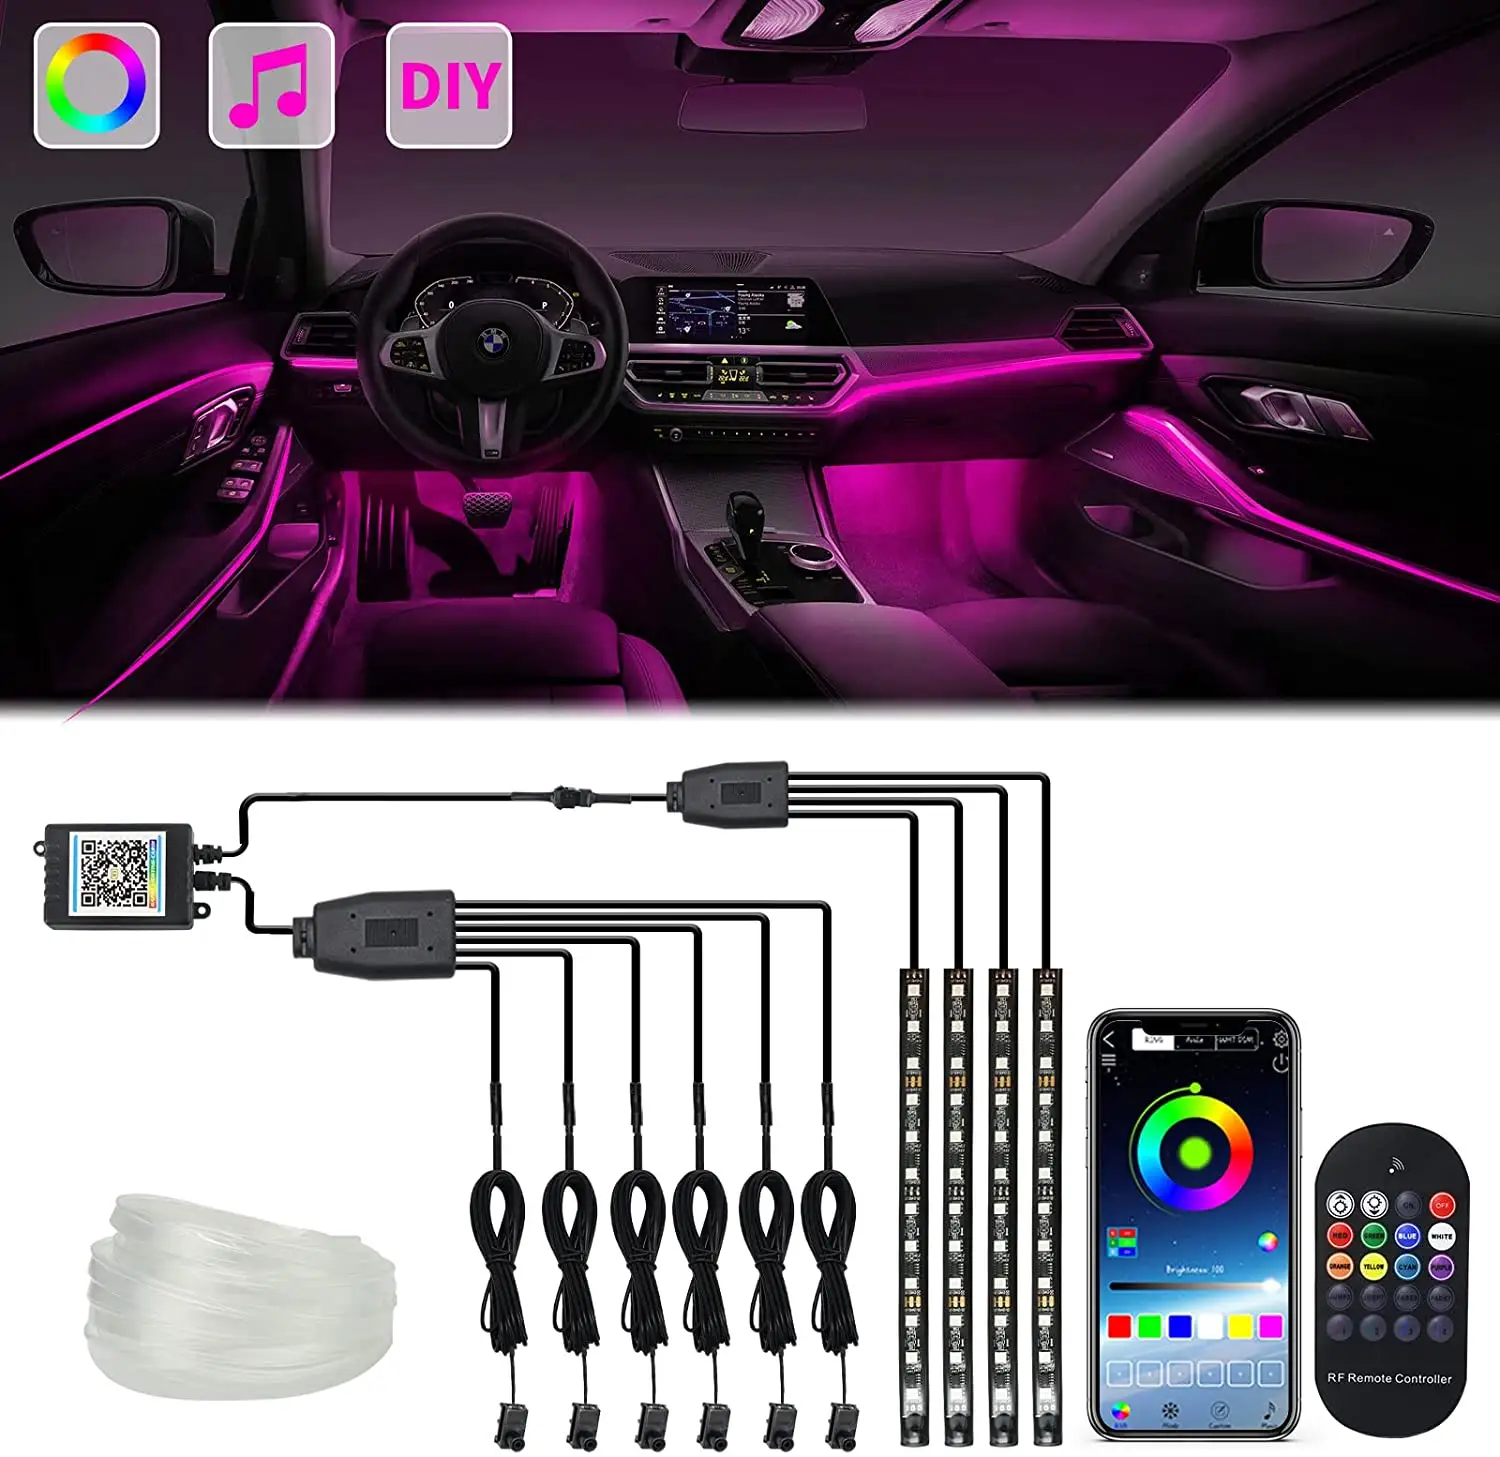 Interior Car Lights, Car Accessories 10 in 1 Car LED Strip Lights with APP Control, Multicolor RGB Neon Car Lighting Kits